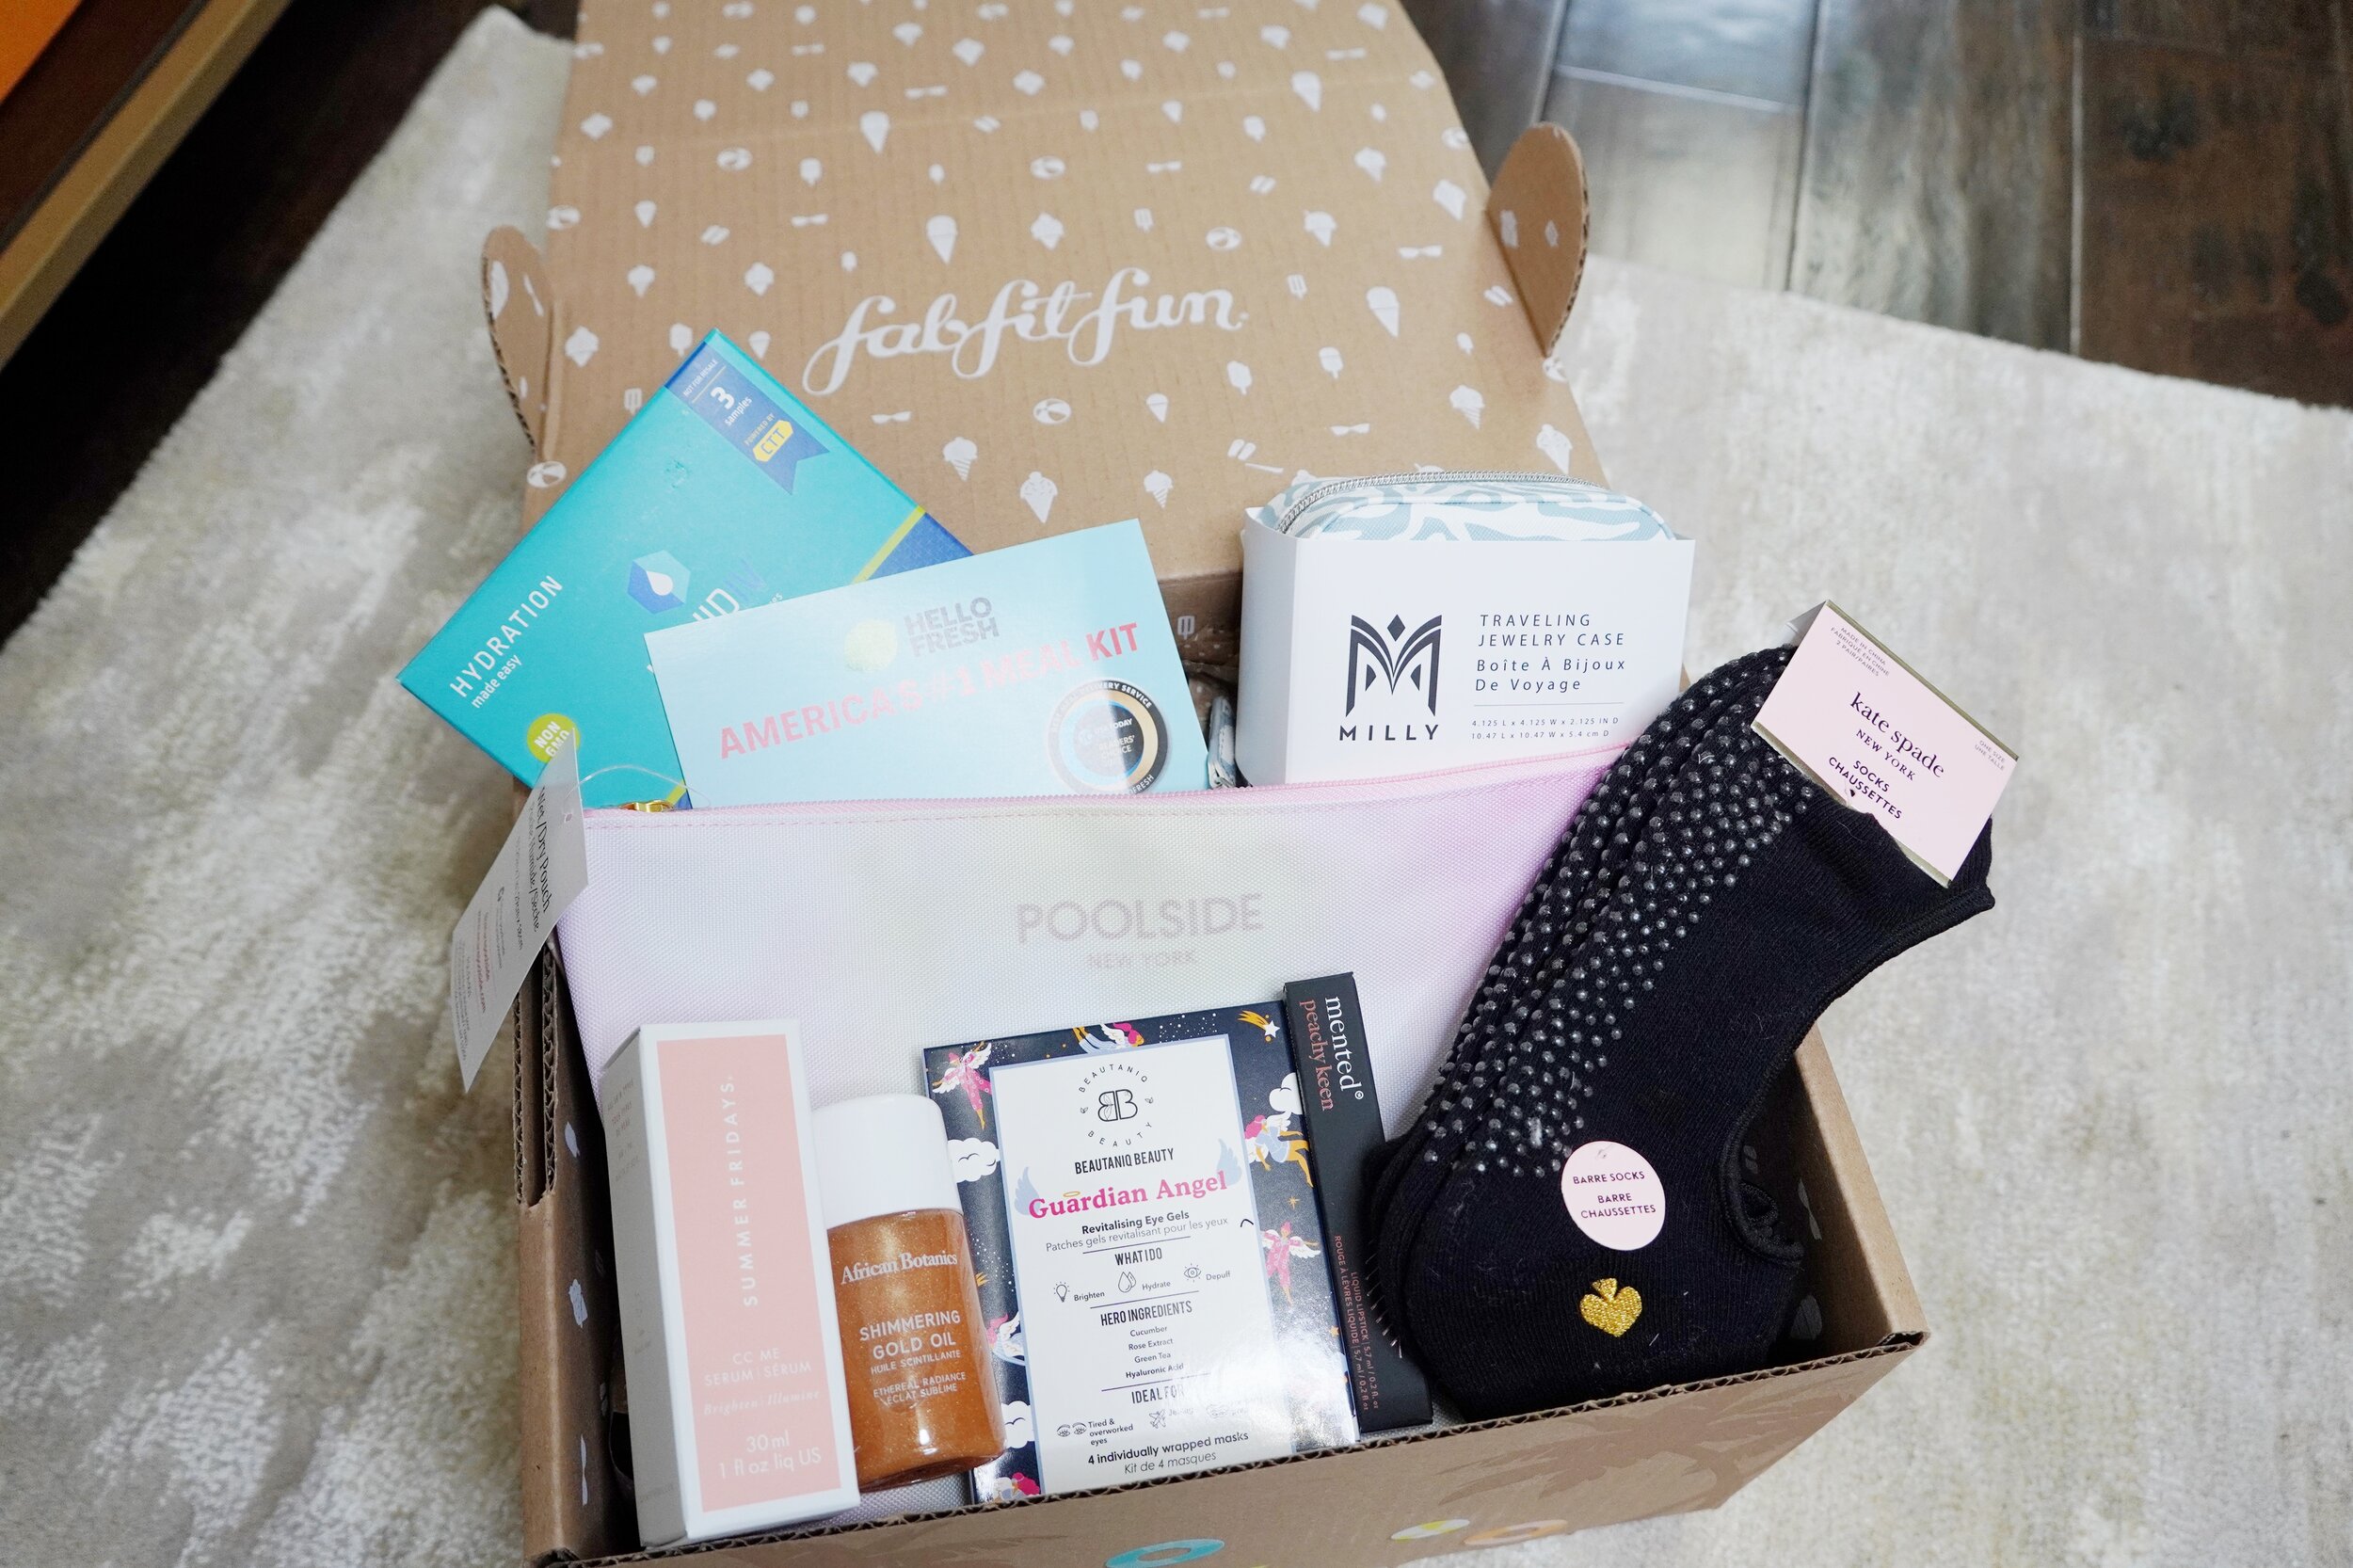 I Finally Got to Try Fab Fit Fun Box - Here is My Honest Review